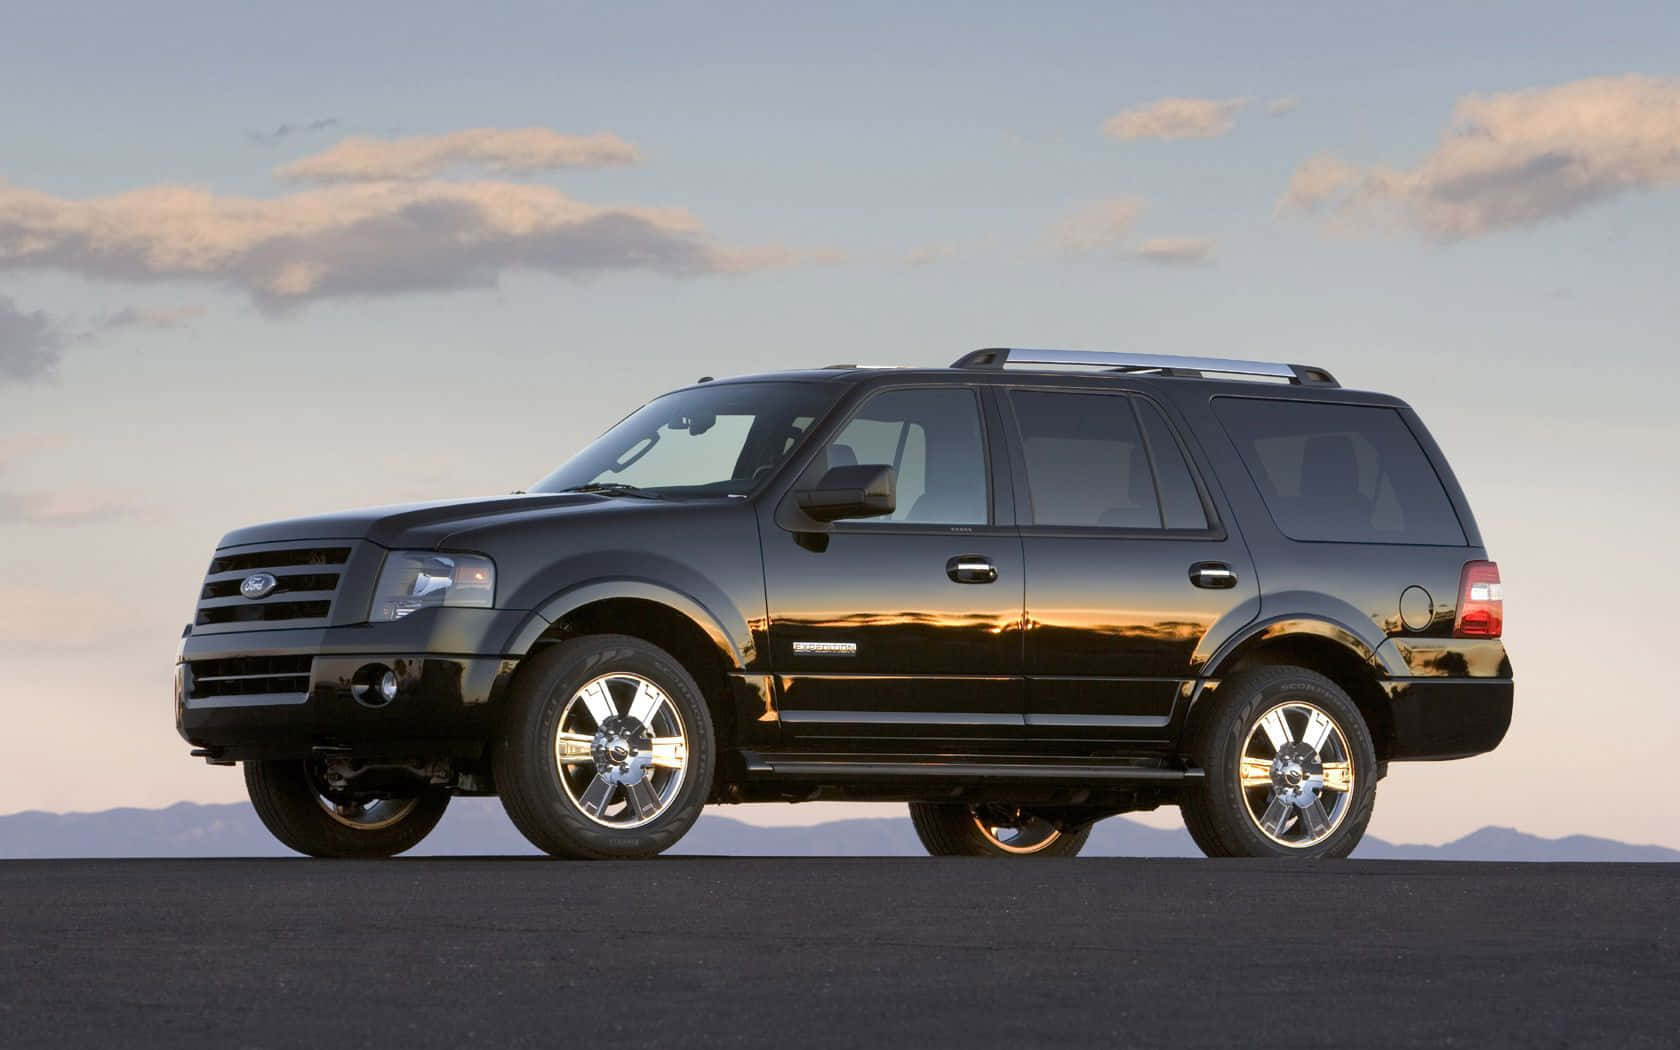 Ford Expedition Driving Through a Scenic Landscape Wallpaper